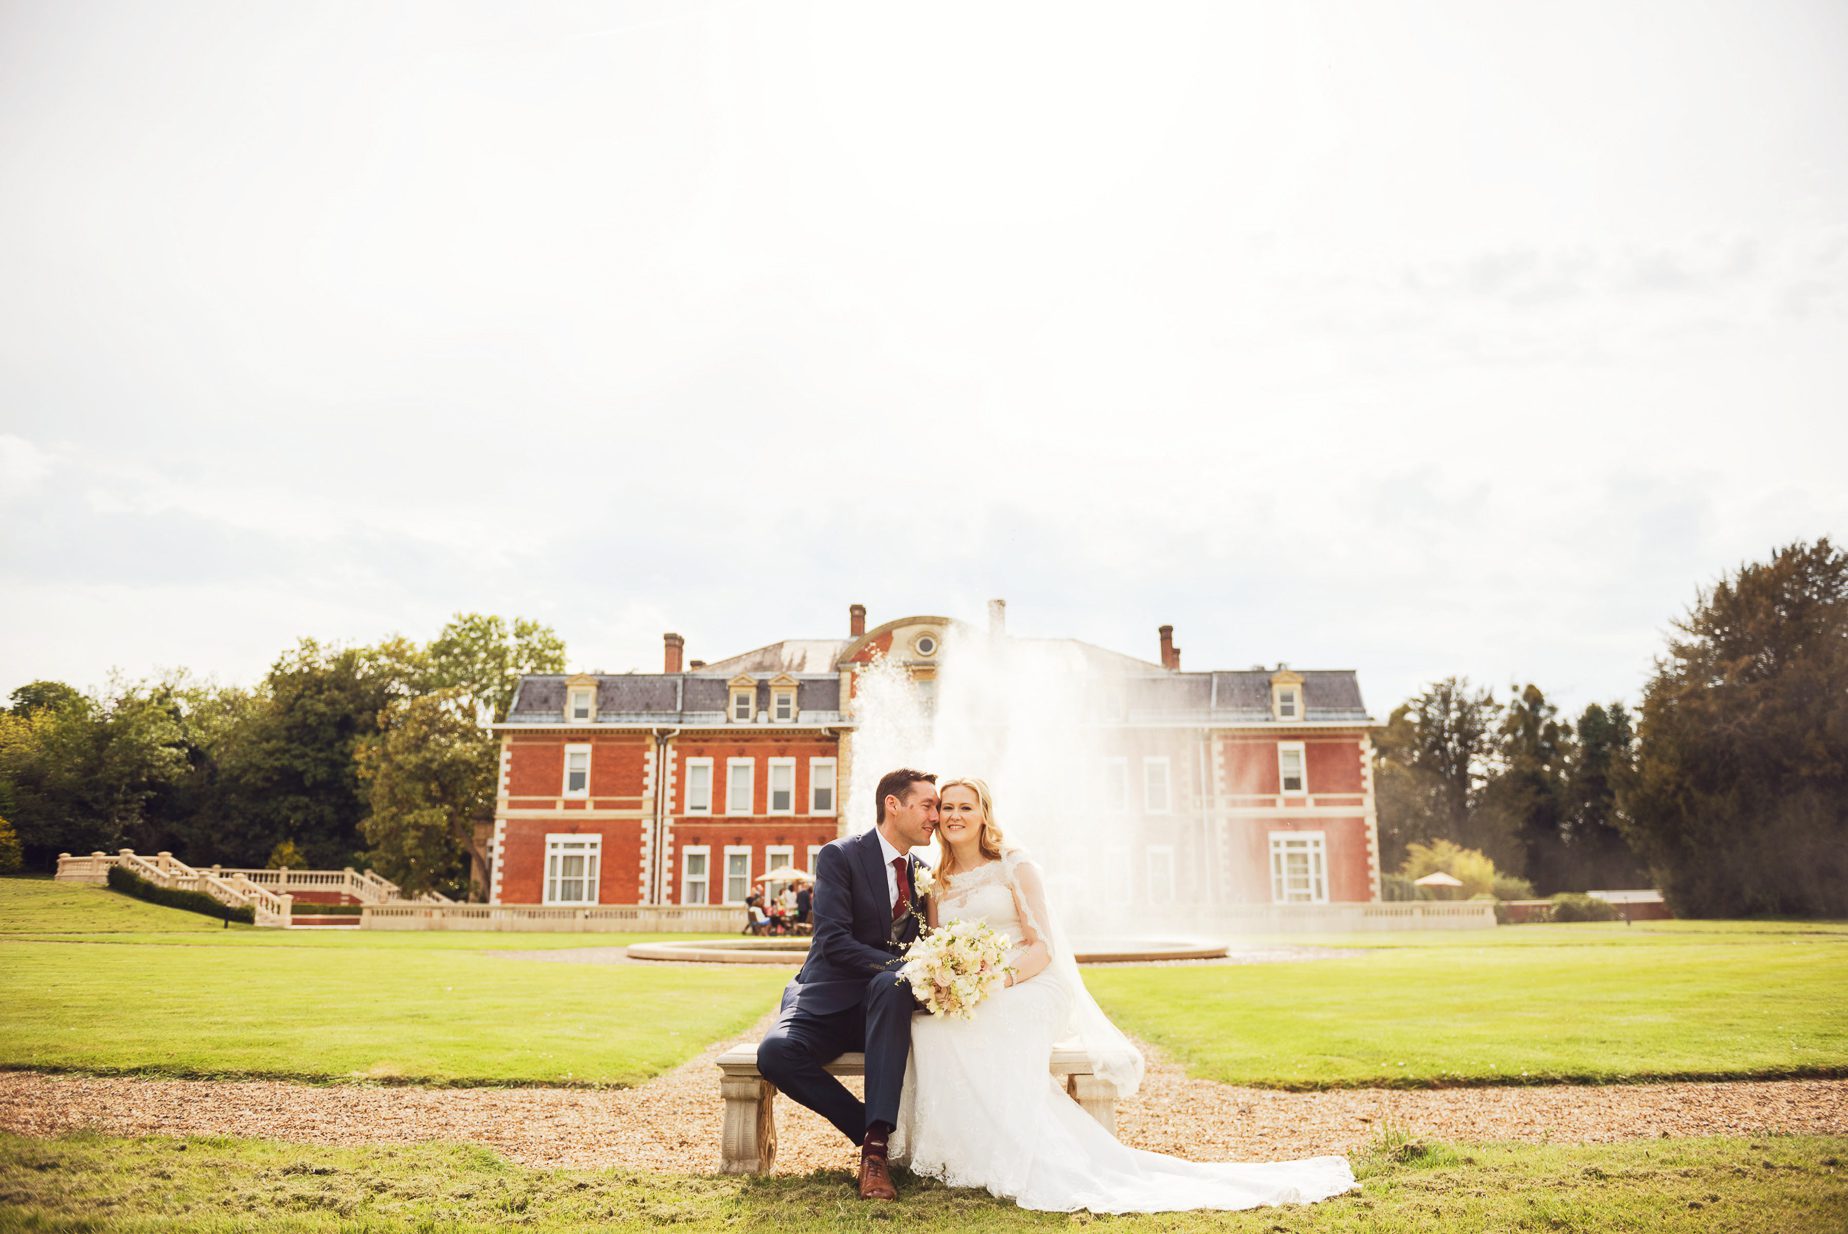 Recommended wedding suppliers at Fetcham park in Surrey.